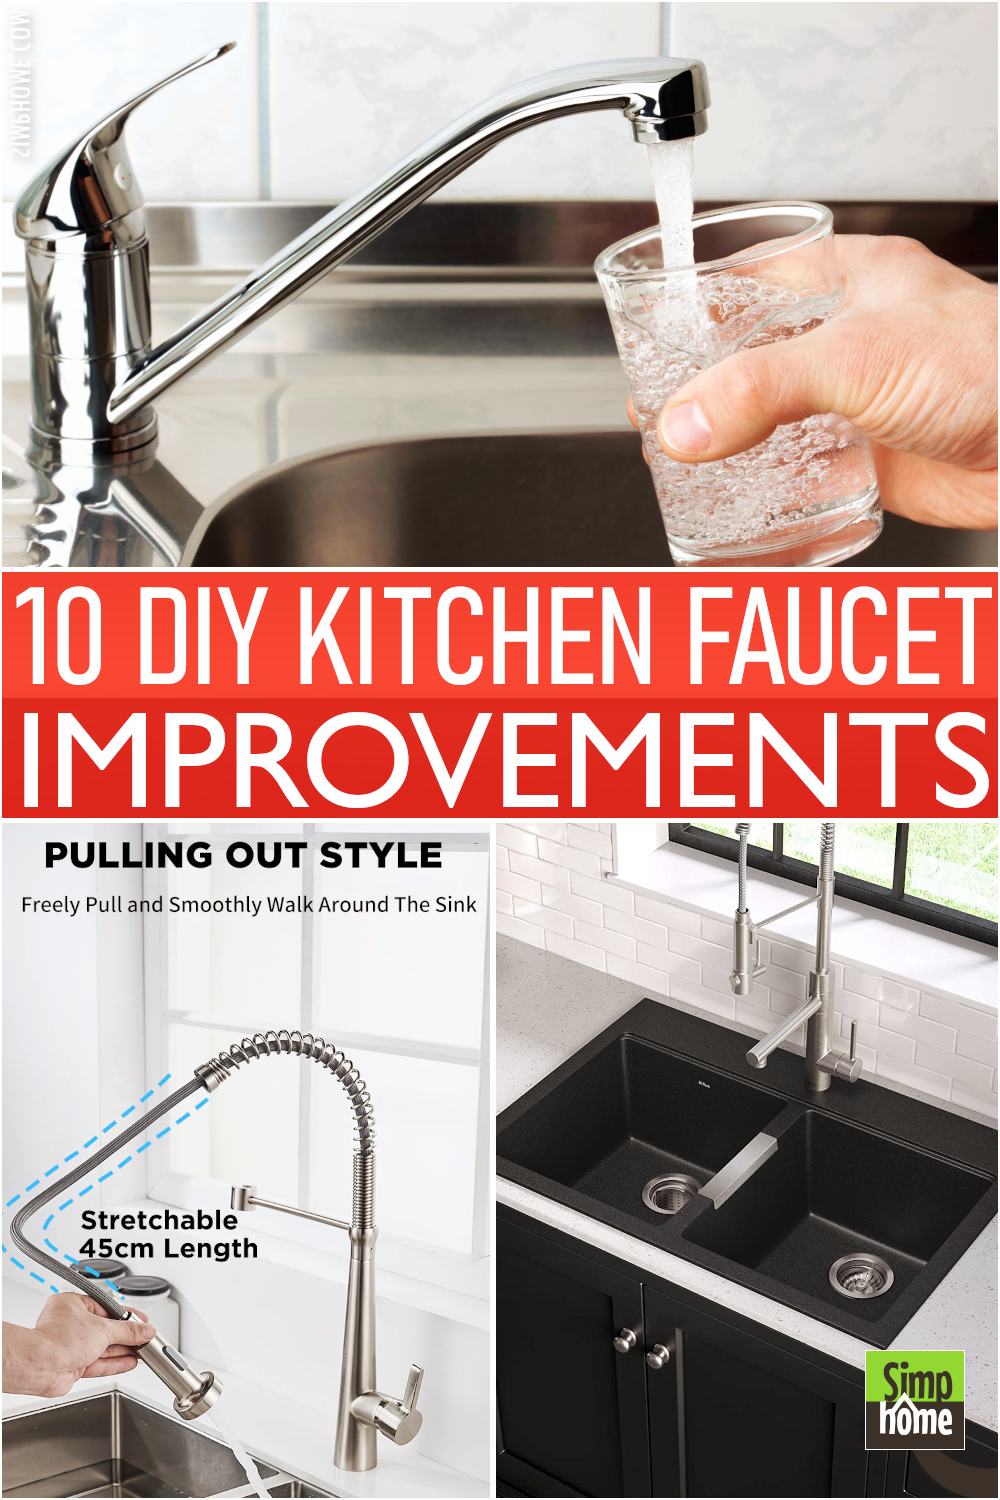 10 Kitchen Faucet Upgrades and DIY Project Improvements Poster